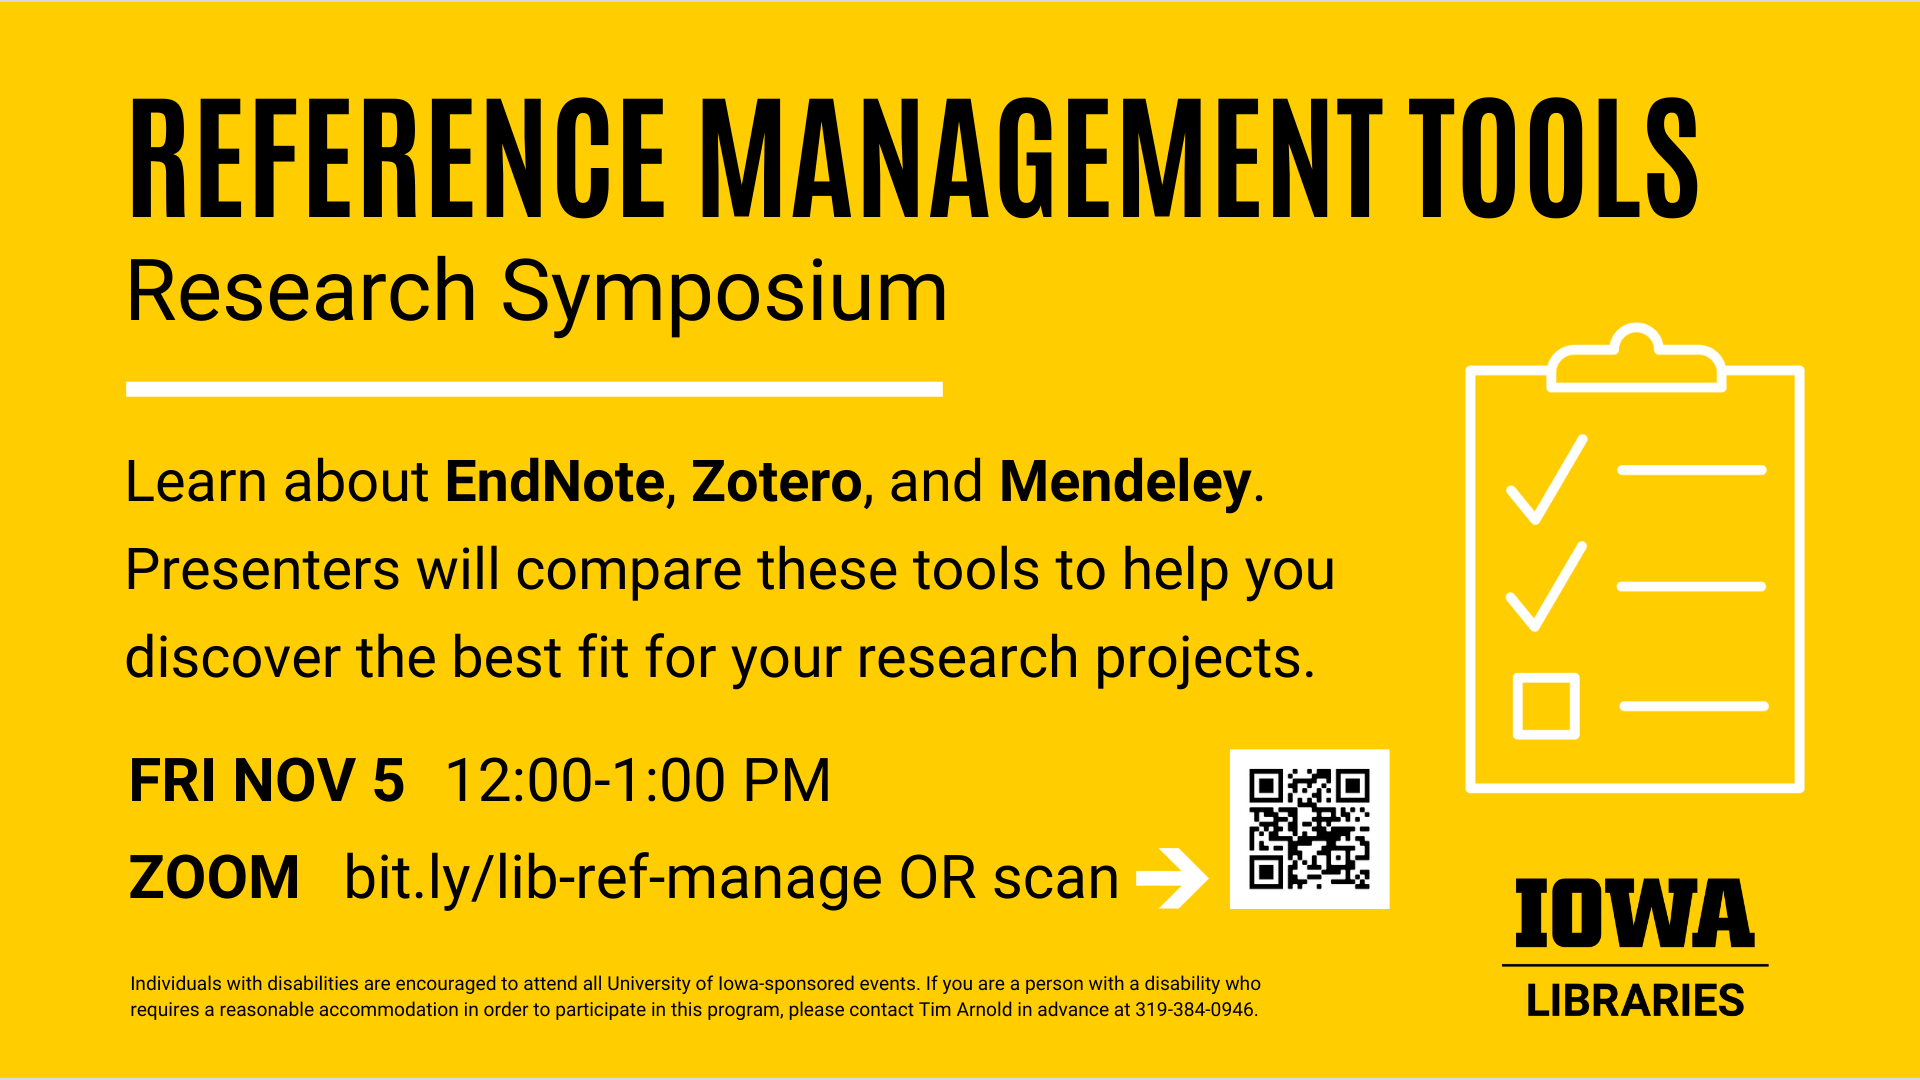 Reference management tools research symposium. Learn about EndNote, Zotero, and Mendeley. Presenters will compare these tools to help you discover the best fit for your research projects. Happening Friday, November 5 from 12 to 1 pm. Zoom link at bit.ly/lib-ref-manage. Individuals with disabilities are encouraged to attend all University of Iowa sponsored events. If you are a person with a disability who requires a reasonable accommodation in order to participate in this program, please contact Tim Arnold in advance at 319 384 0946